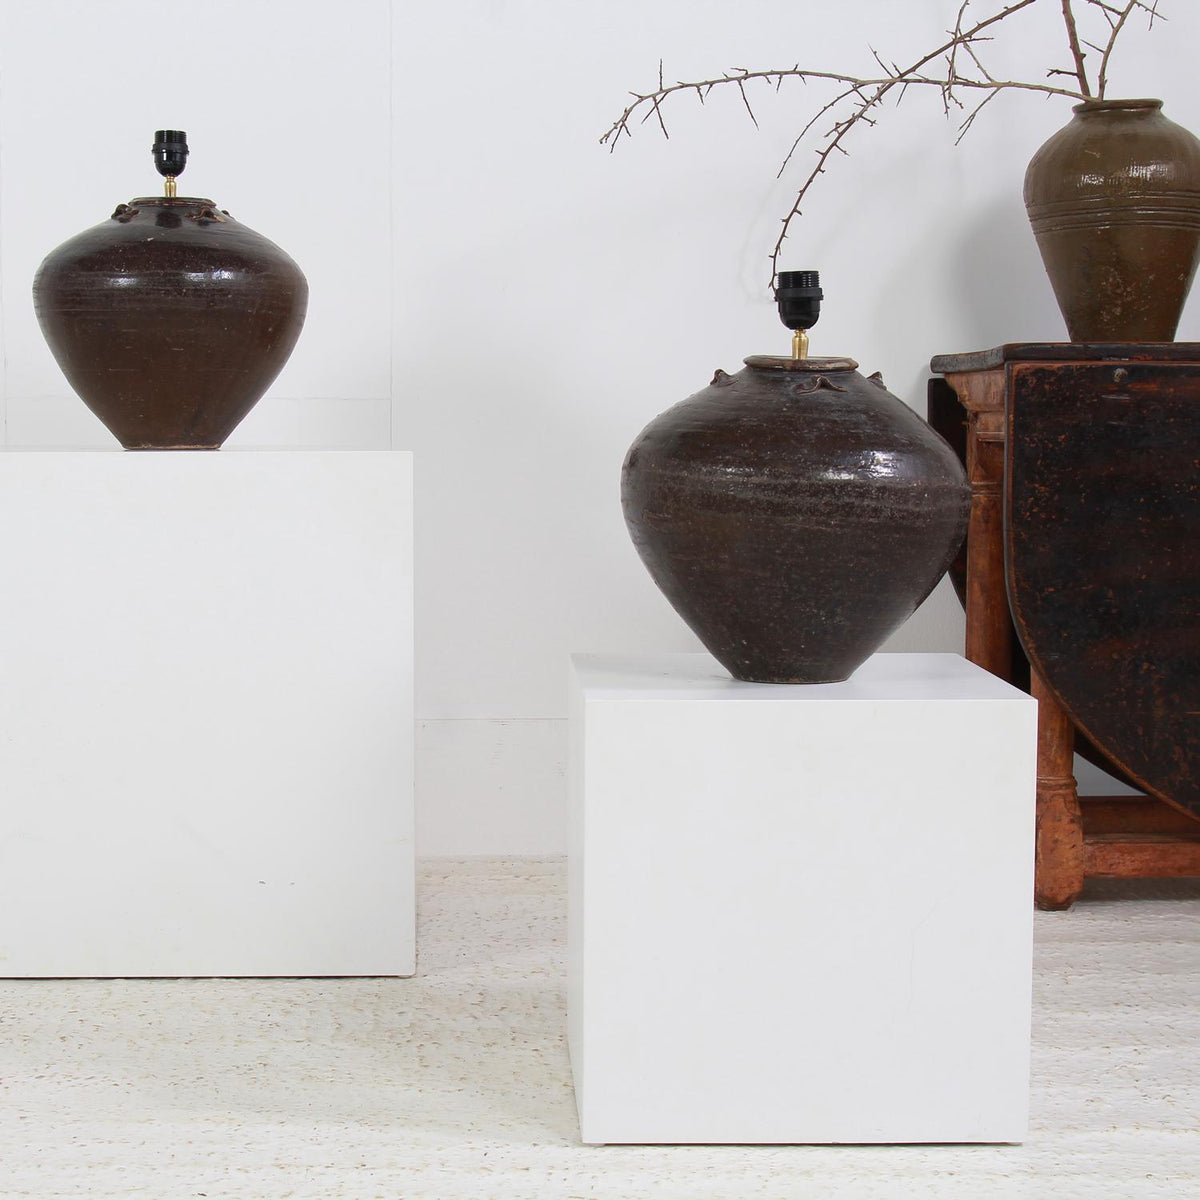 ANTIQUE CHINESE CERAMIC WINE POTS CONVERTED INTO LAMPS WITH WHITE LINEN SHADE